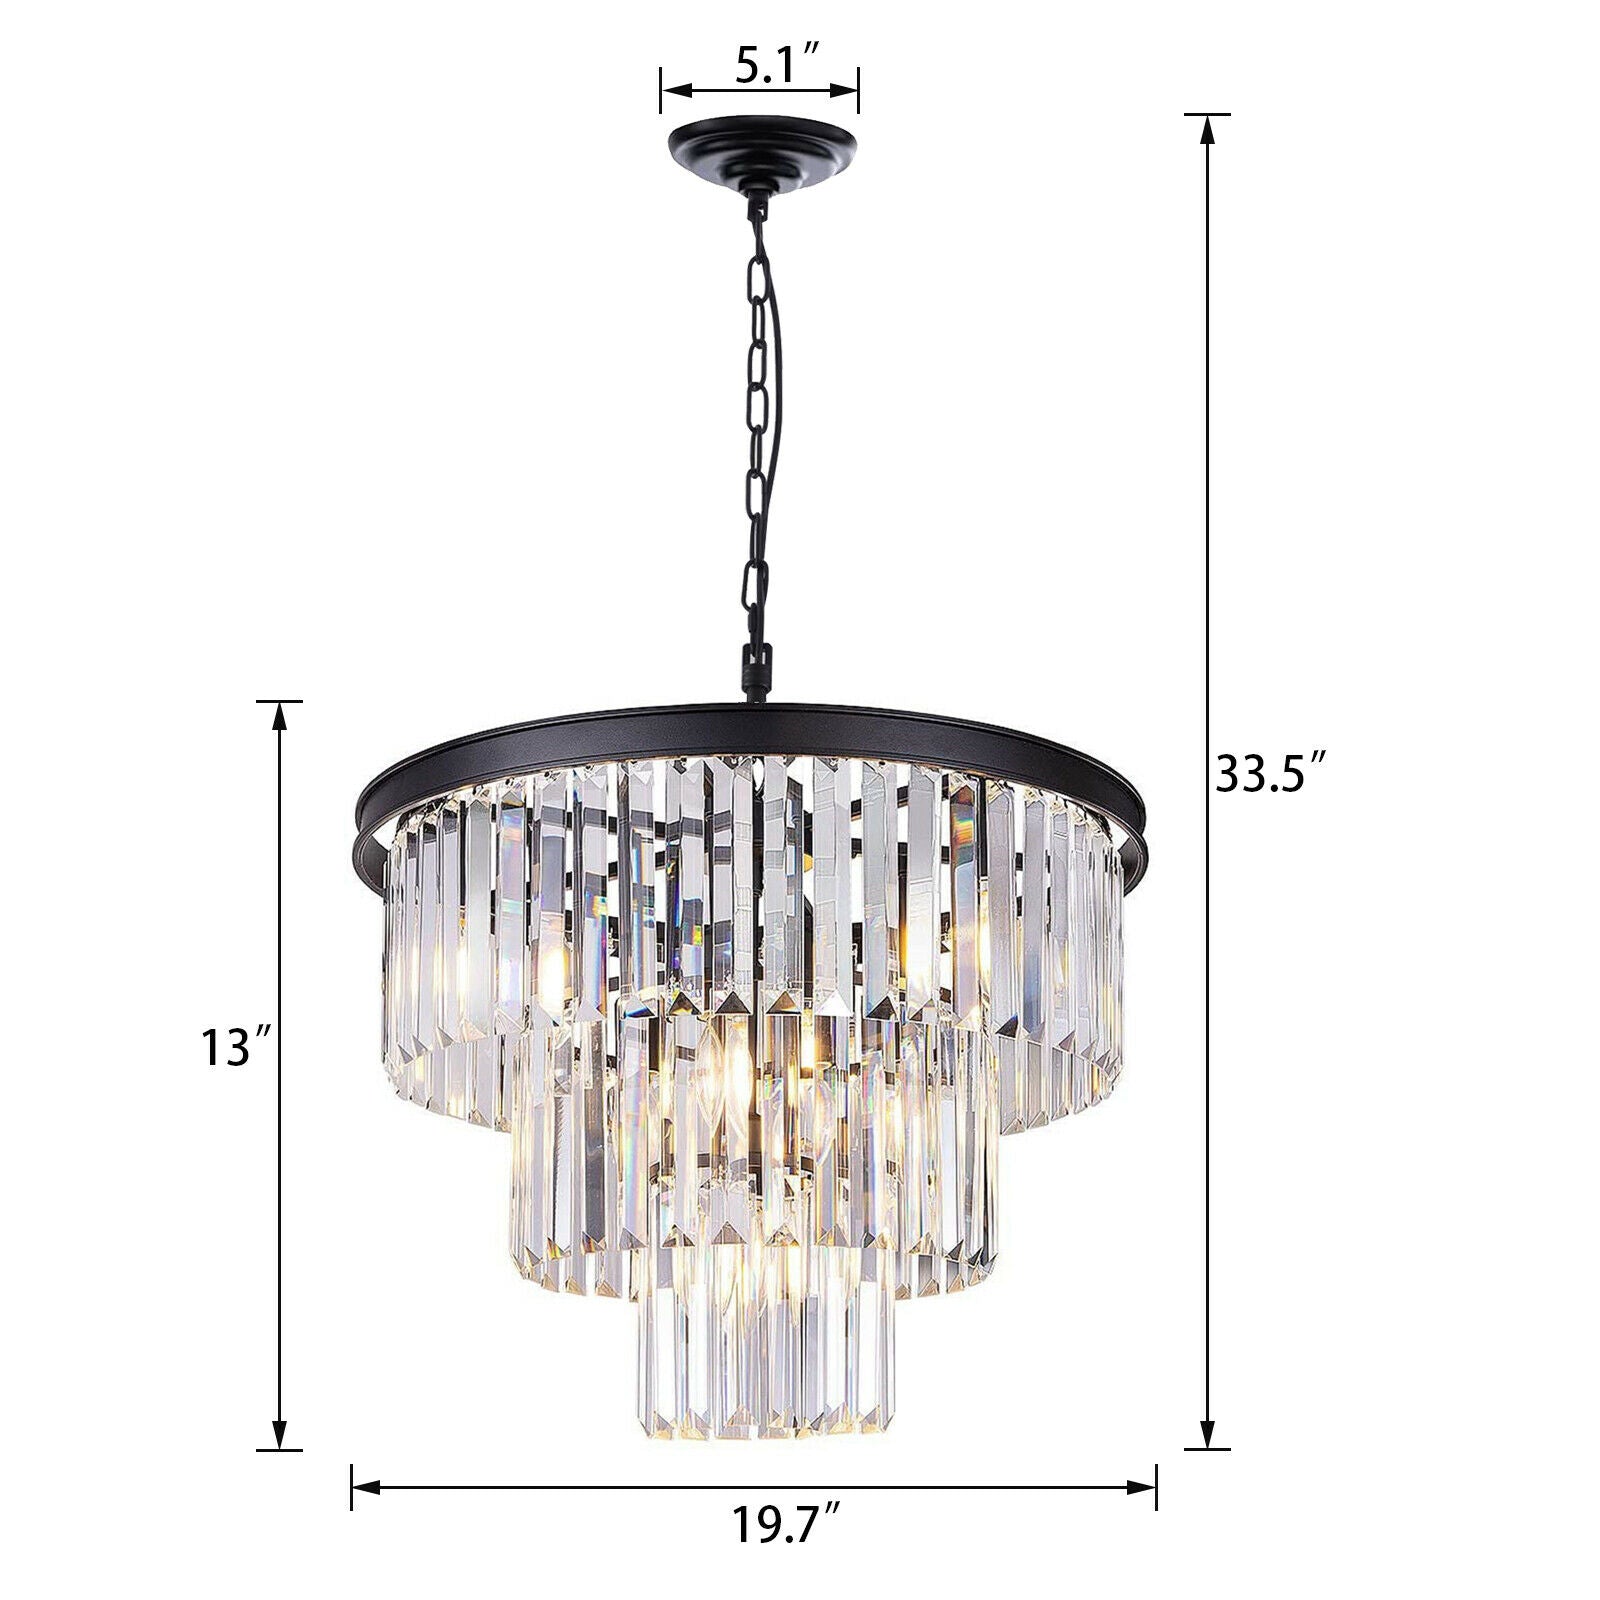 Size of Crystal Ceiling Light Chandelier 3 tier